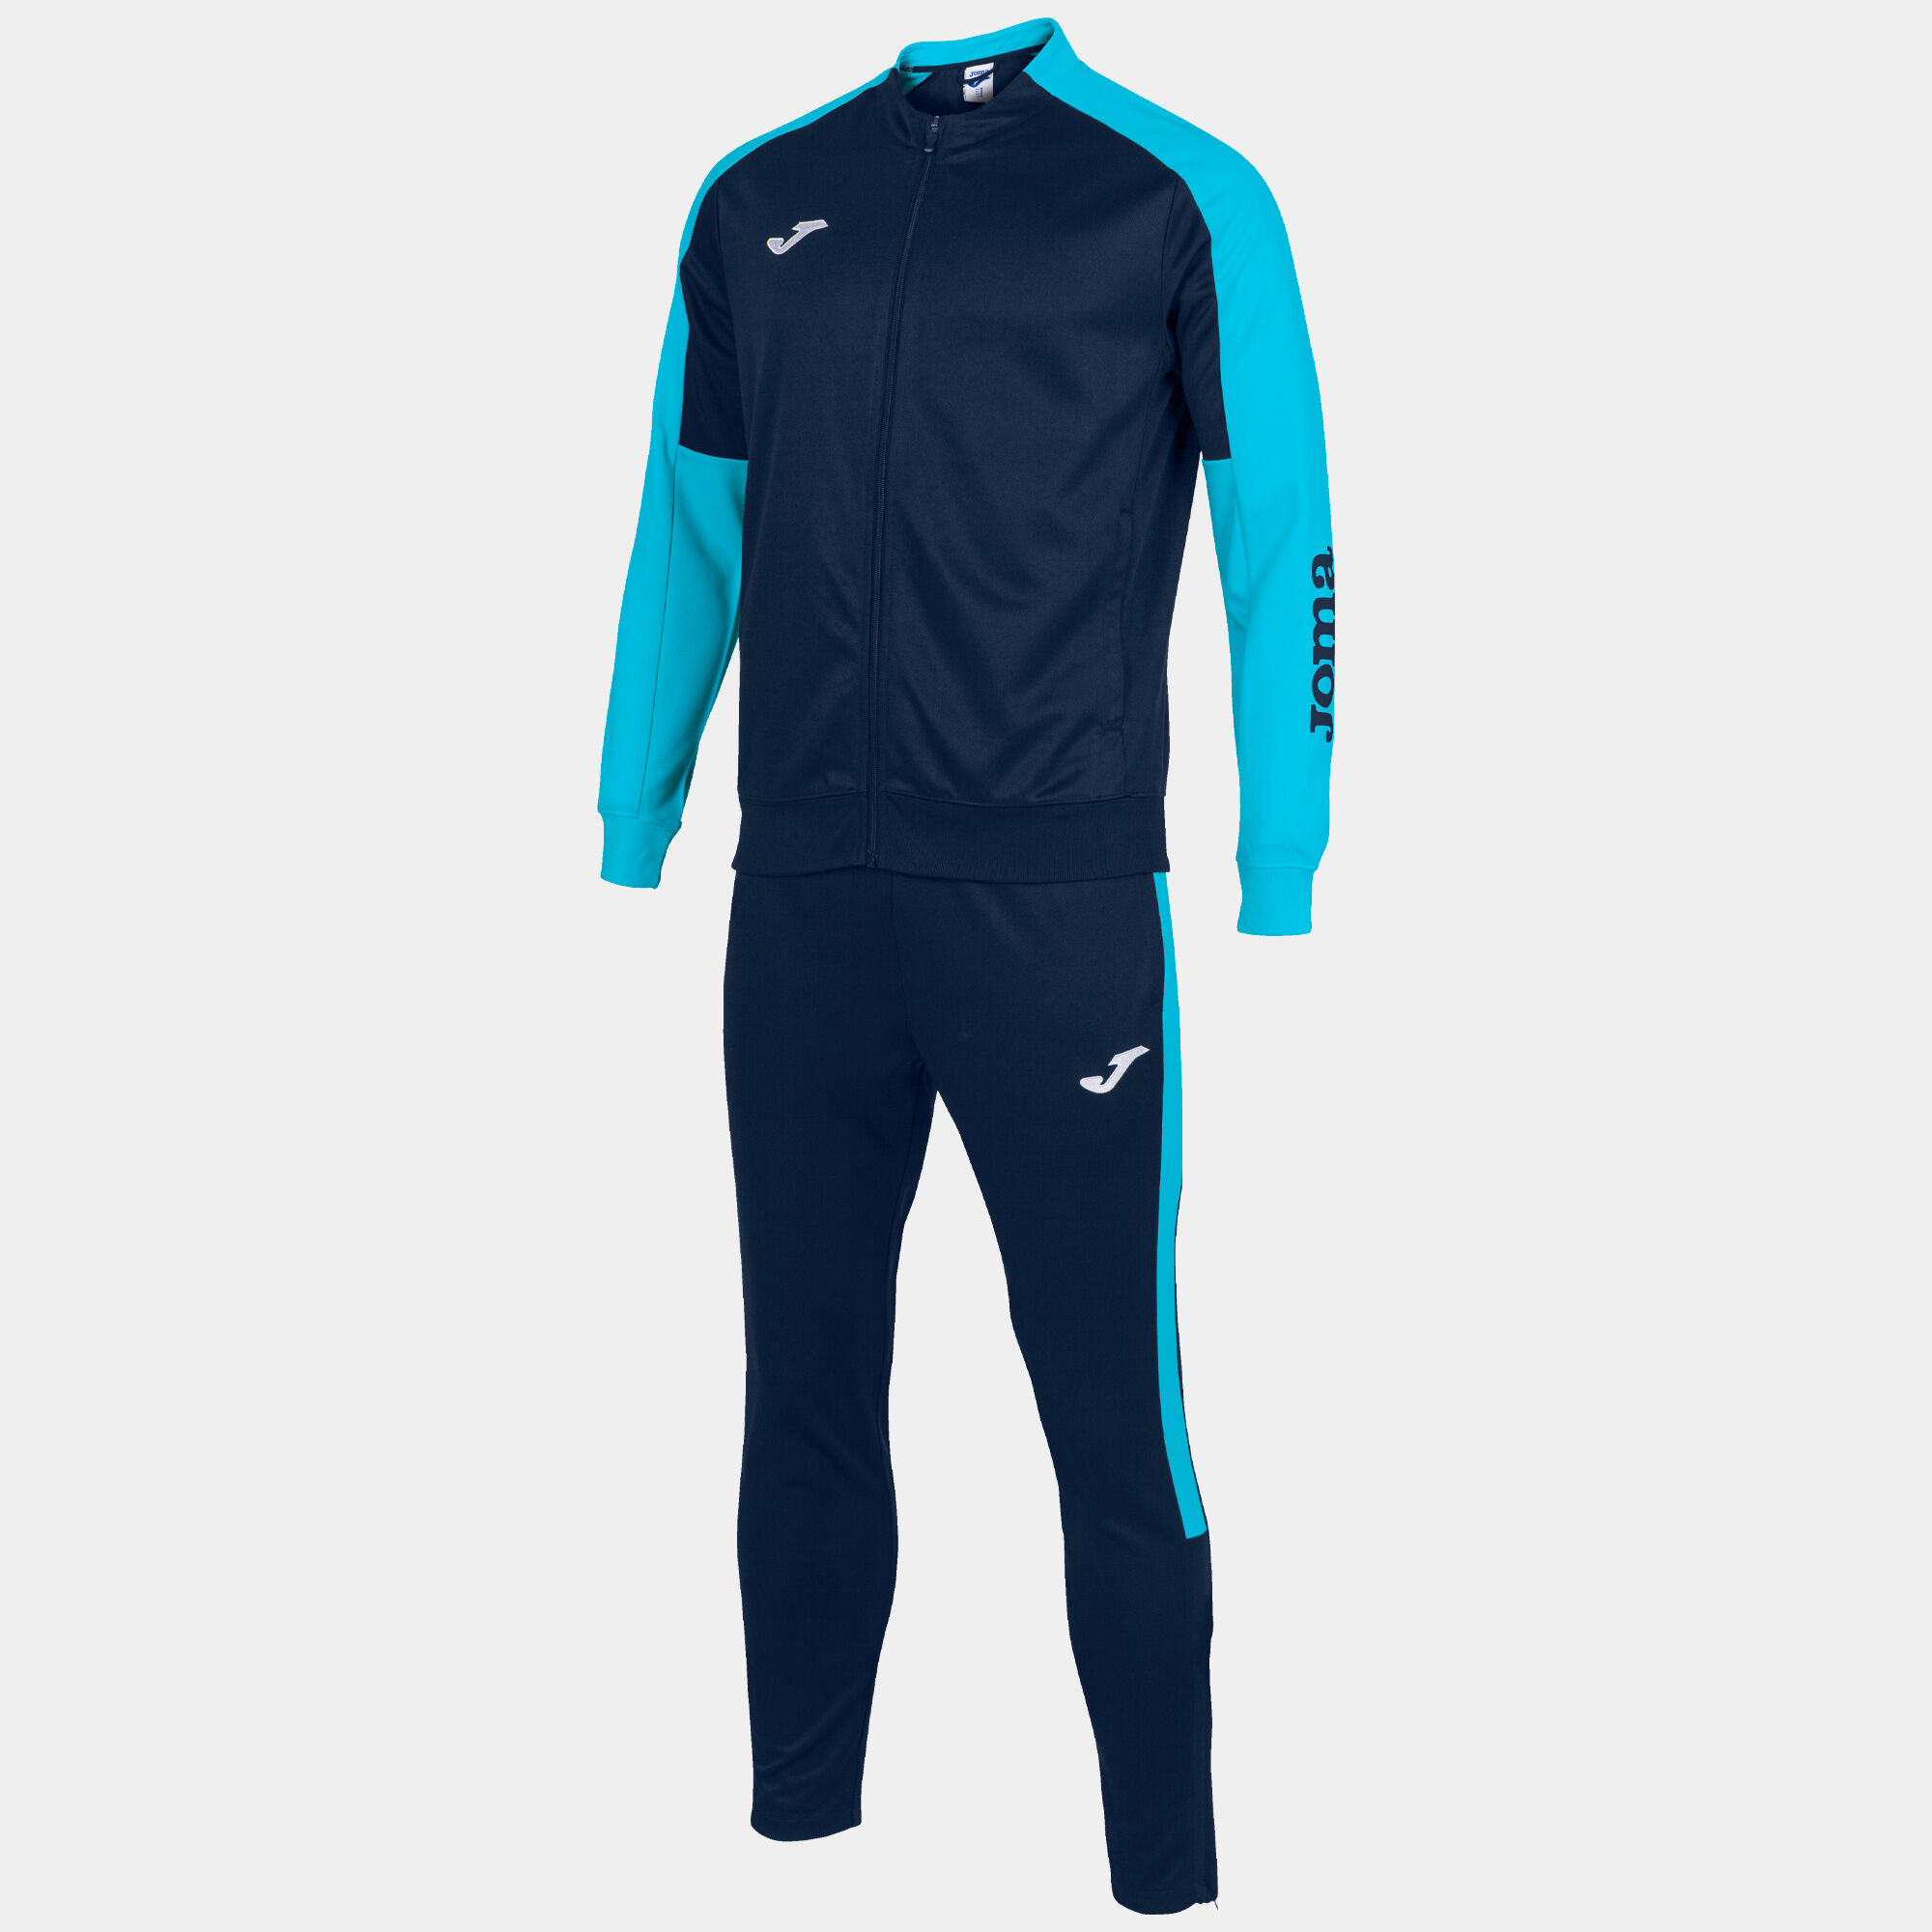 Tracksuit man Eco Championship navy blue fluorescent turquoise